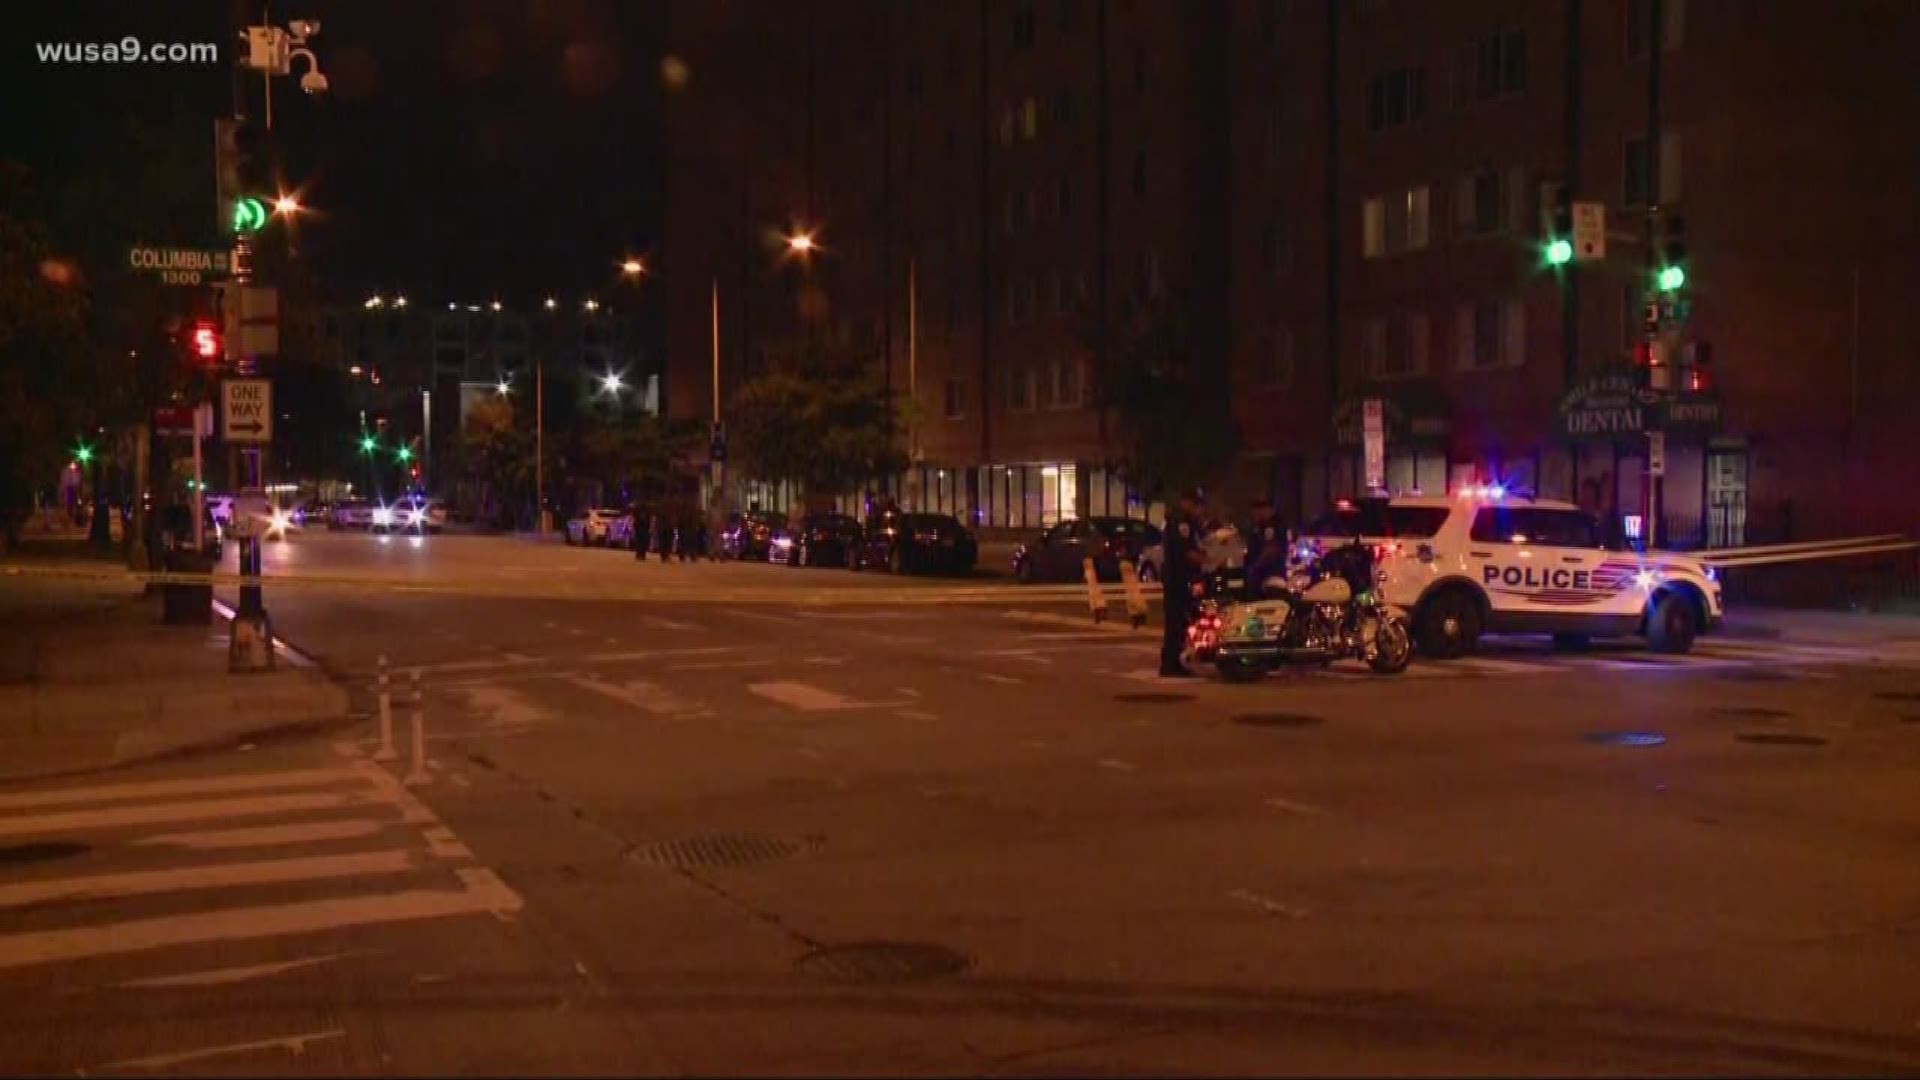 Police are searching for the suspect who shot a man in Northwest, D.C. early Wednesday morning.